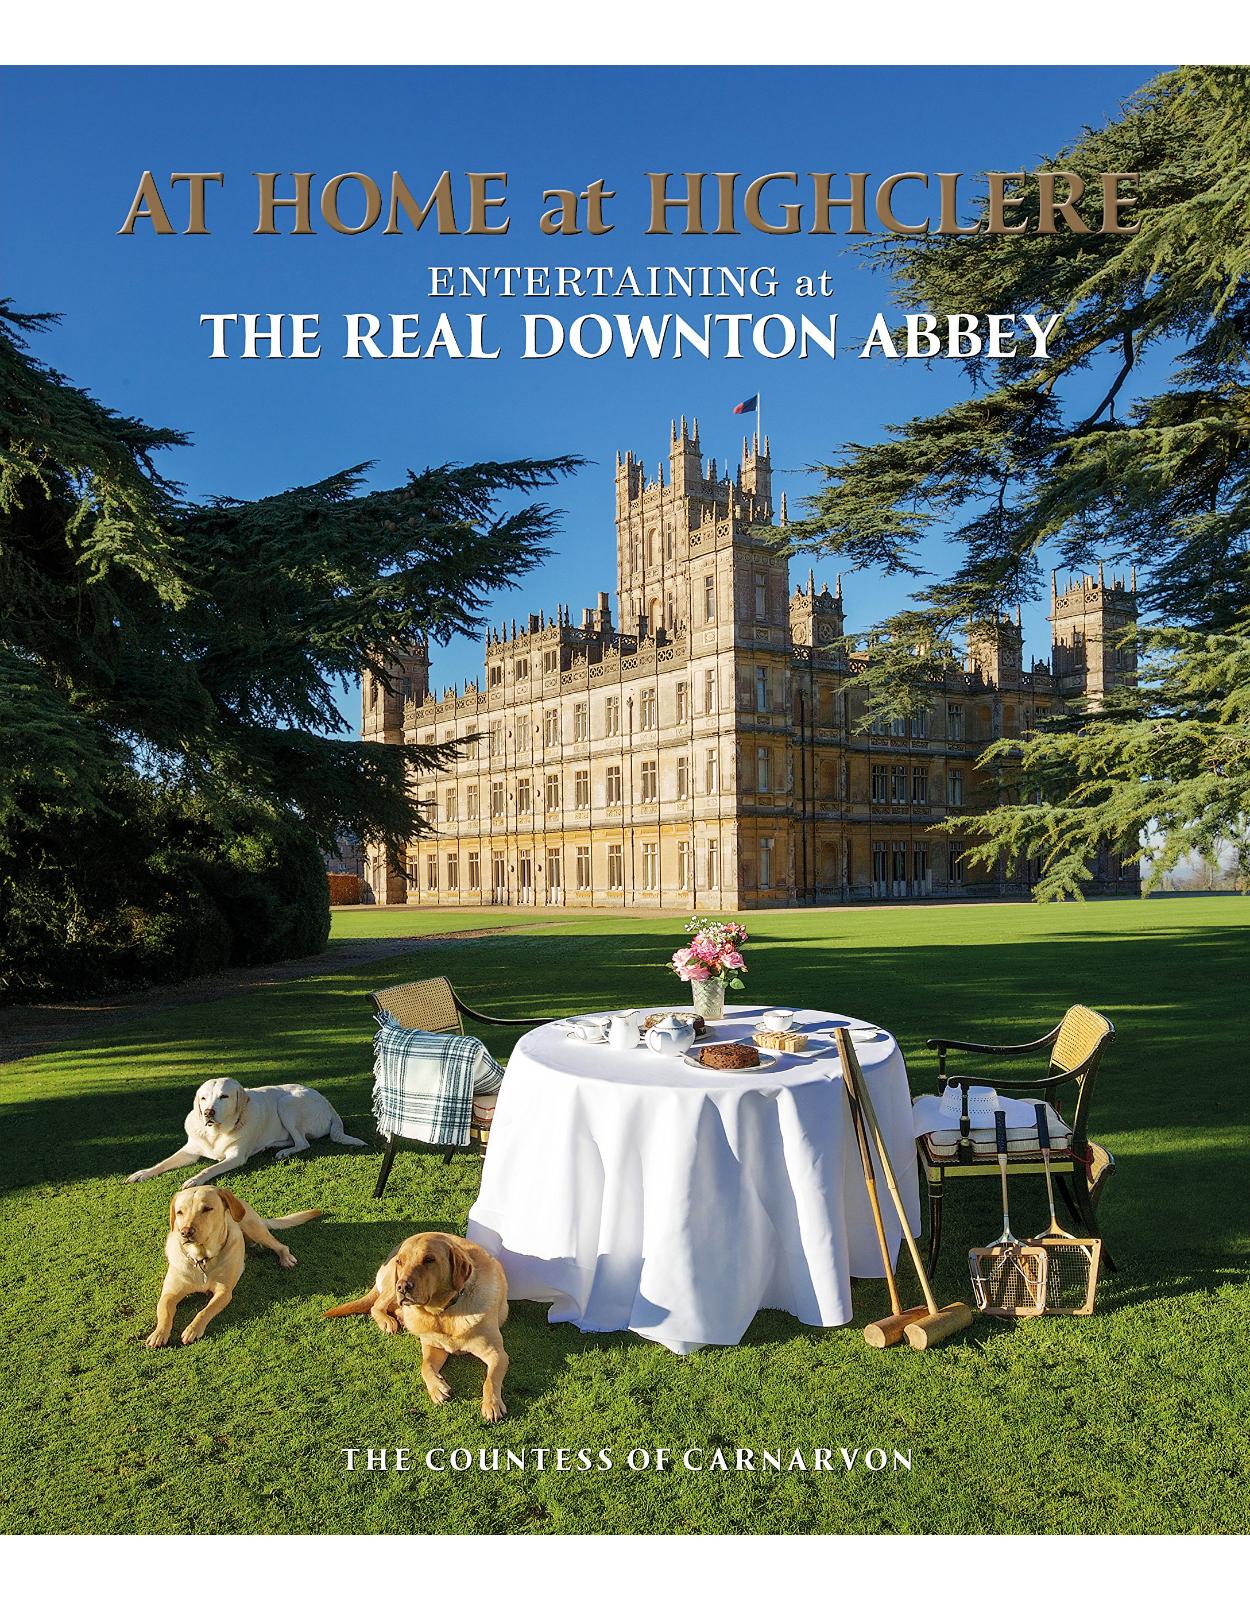 At Home at Highclere: Entertaining at The Real Downton Abbey